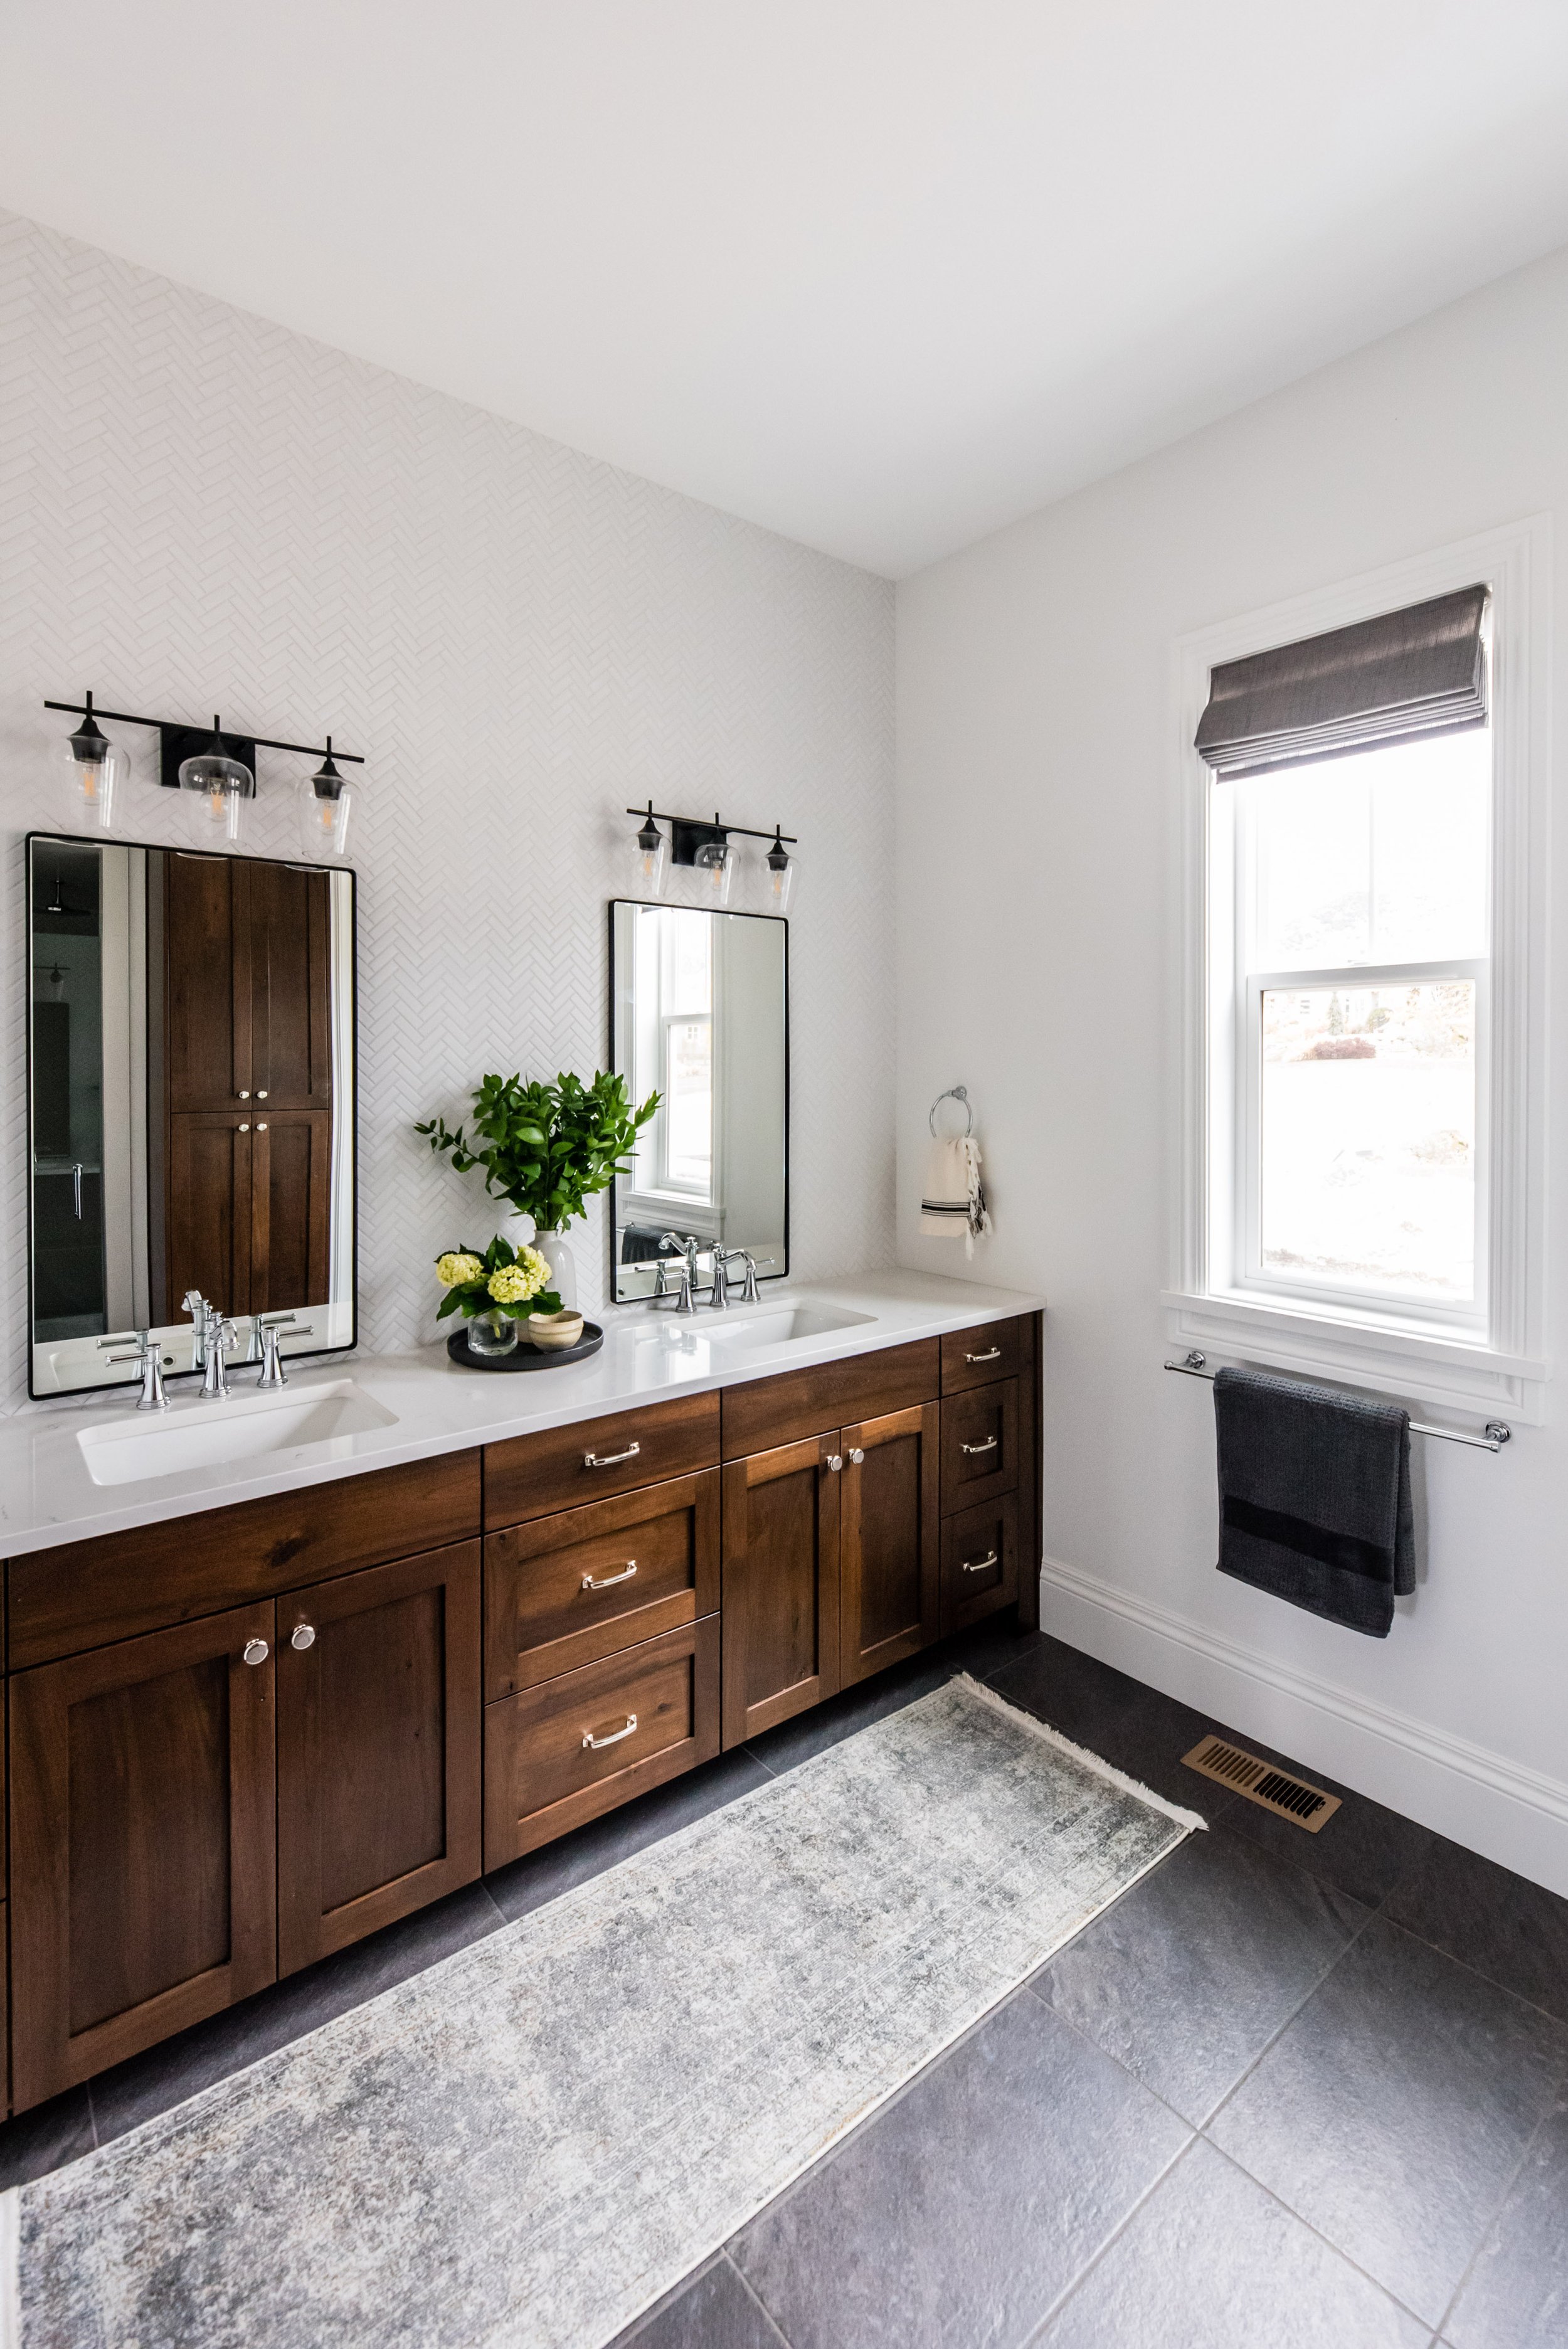  Choose the right cabinets for your bathroom with interior designer Liz Powell Design in Logan, Utah. Wood bathroom vanity modern bathroom #LizPowellDesign #InteriorDesignUtah #InteriorDesigner #buildingahome #cabinetry #dreamhome #interiors #kitchen